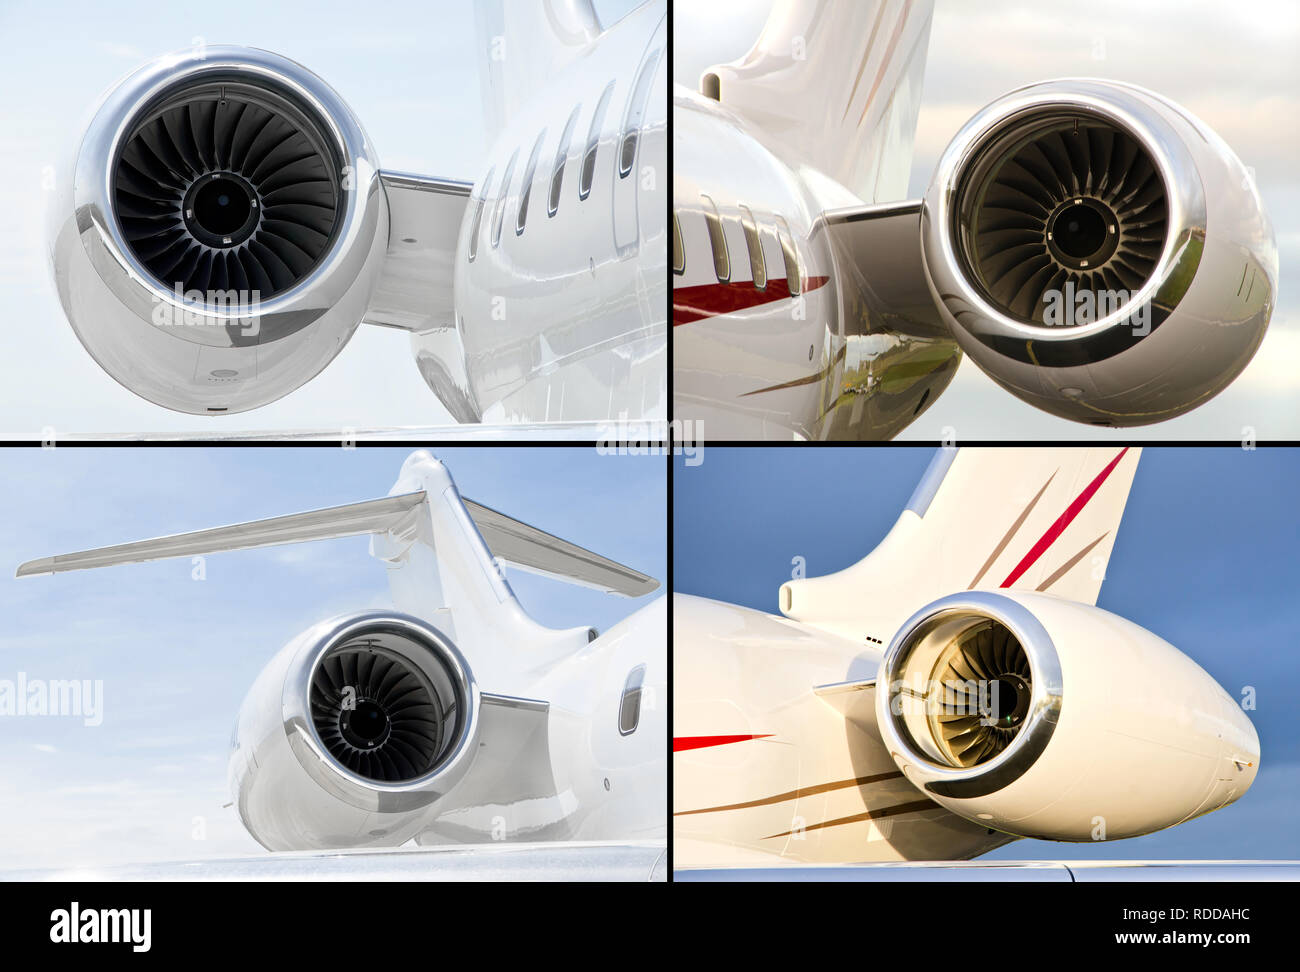 Collection of four jet engines on luxury private jet aircraft Stock Photo -  Alamy